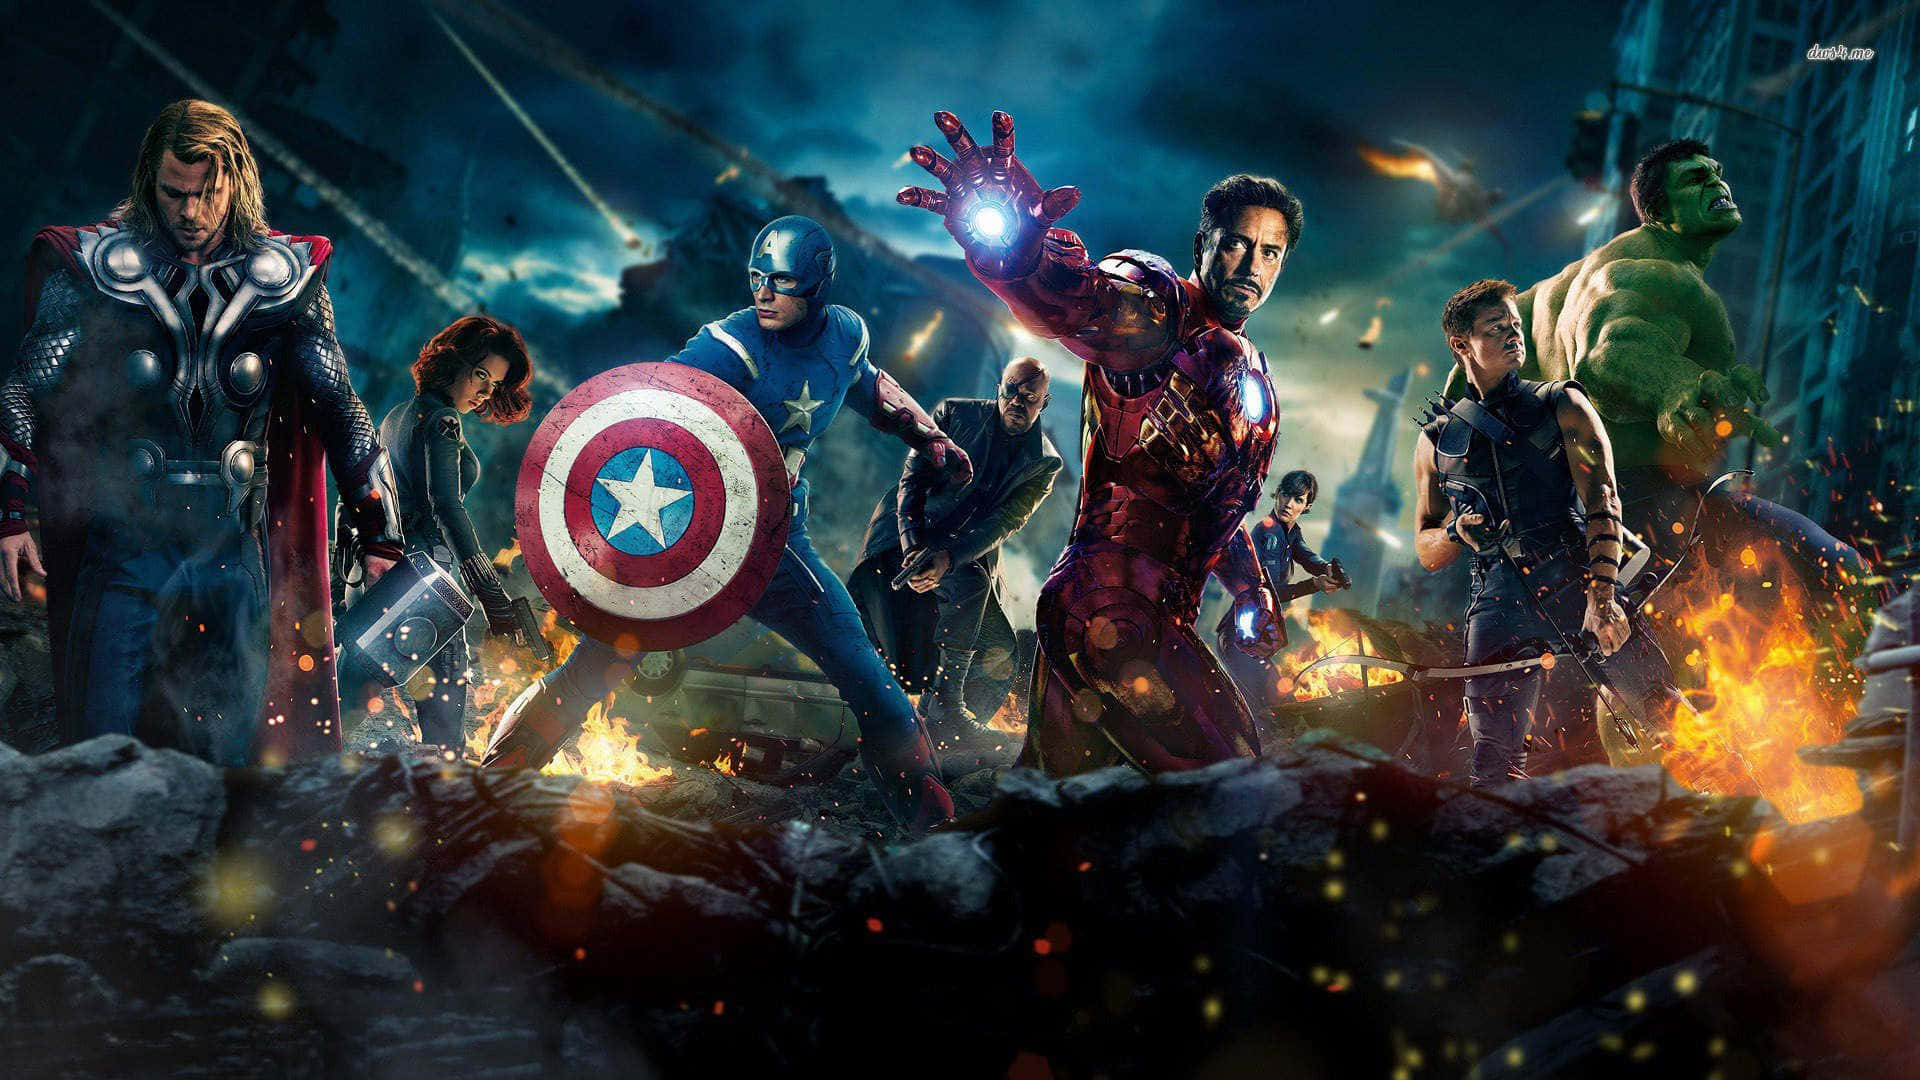 The Avengers team assemble to take on the evil forces. Wallpaper